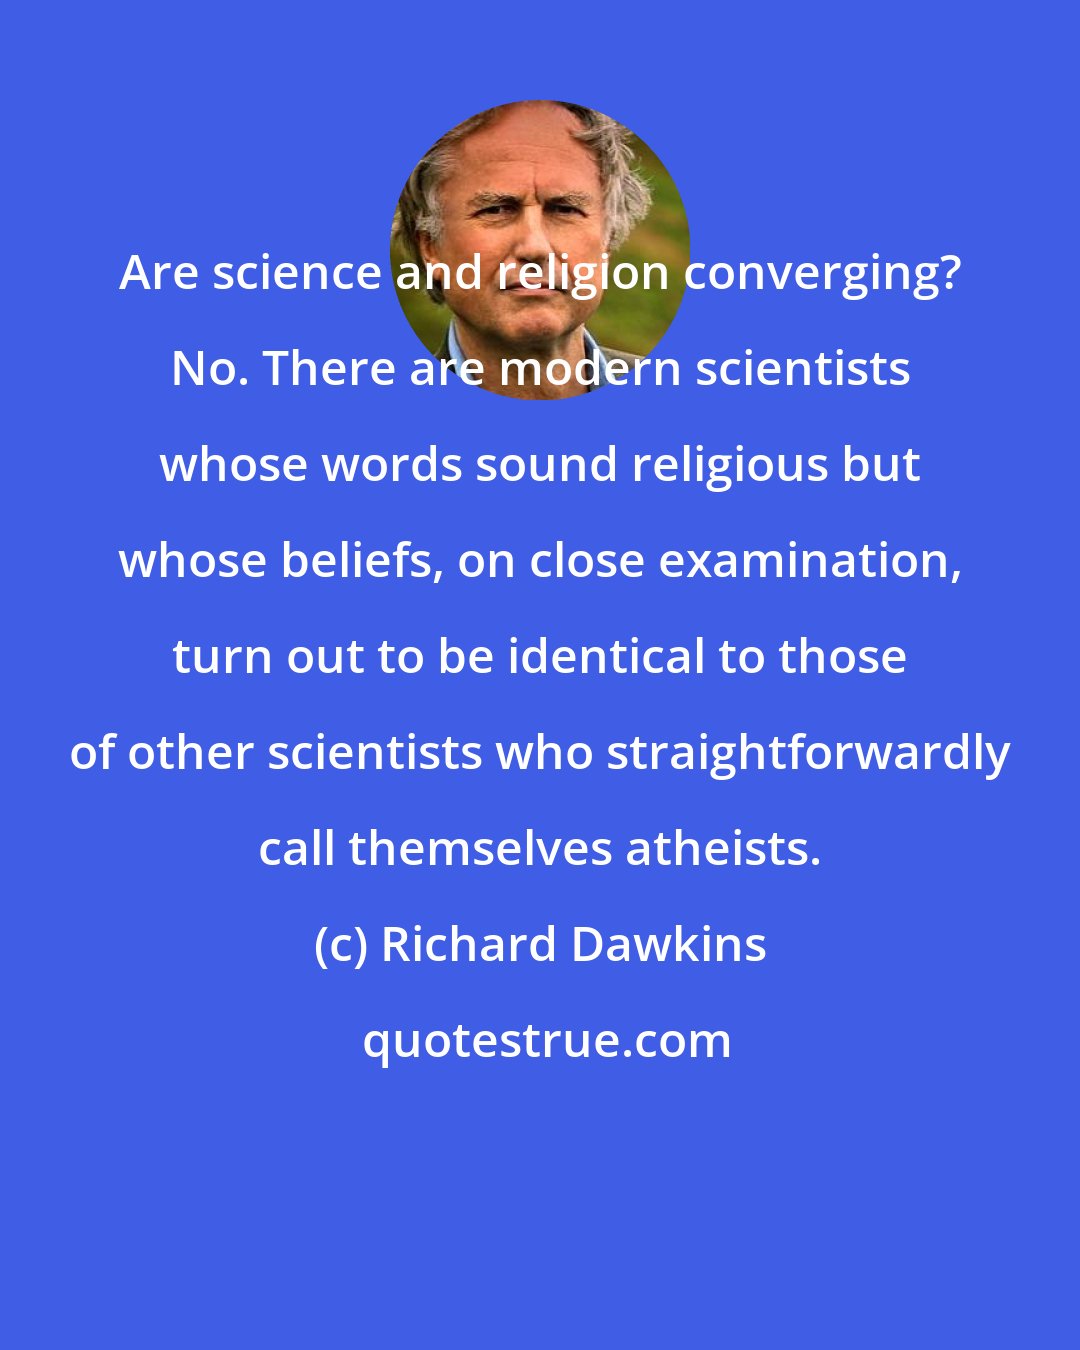 Richard Dawkins: Are science and religion converging? No. There are modern scientists whose words sound religious but whose beliefs, on close examination, turn out to be identical to those of other scientists who straightforwardly call themselves atheists.